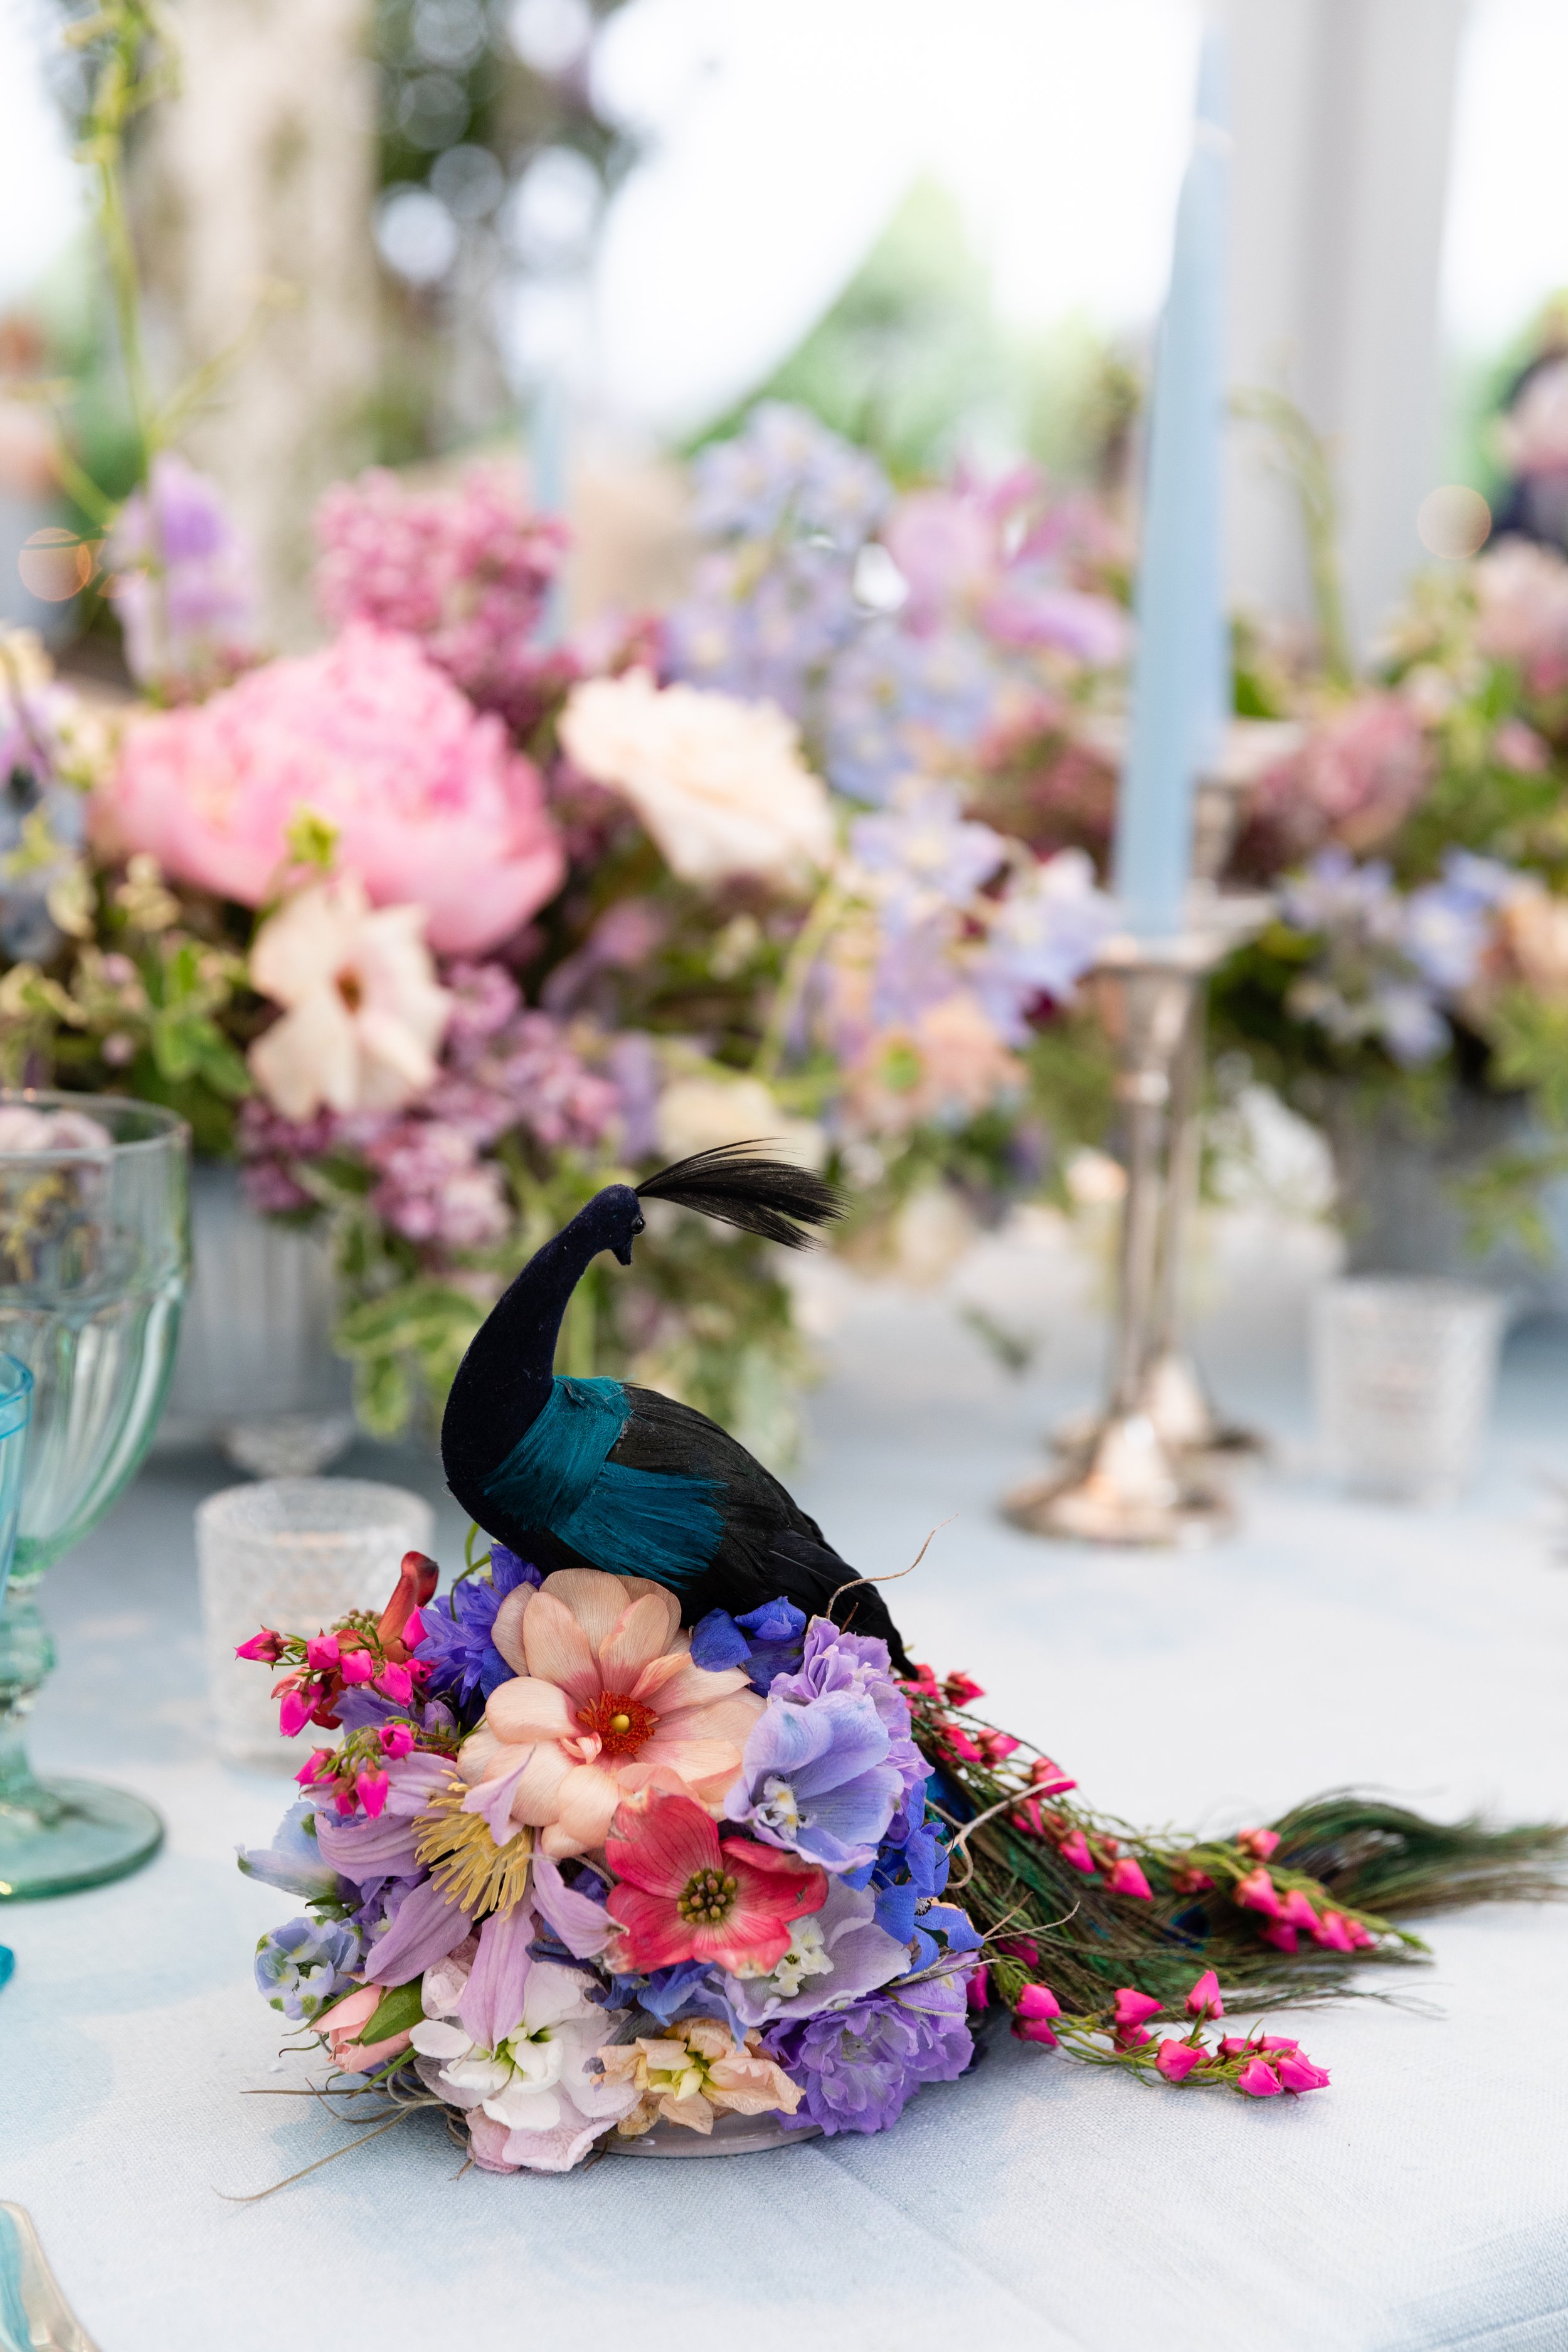 Growing, fresh floral centerpieces with a peacock, including blush garden roses, lilac, blue sweet peas, ranunculus, lavender delphinium, globe allium, and natural greenery for a tented Bridgerton inspired engagement party at a private home in Nashvi